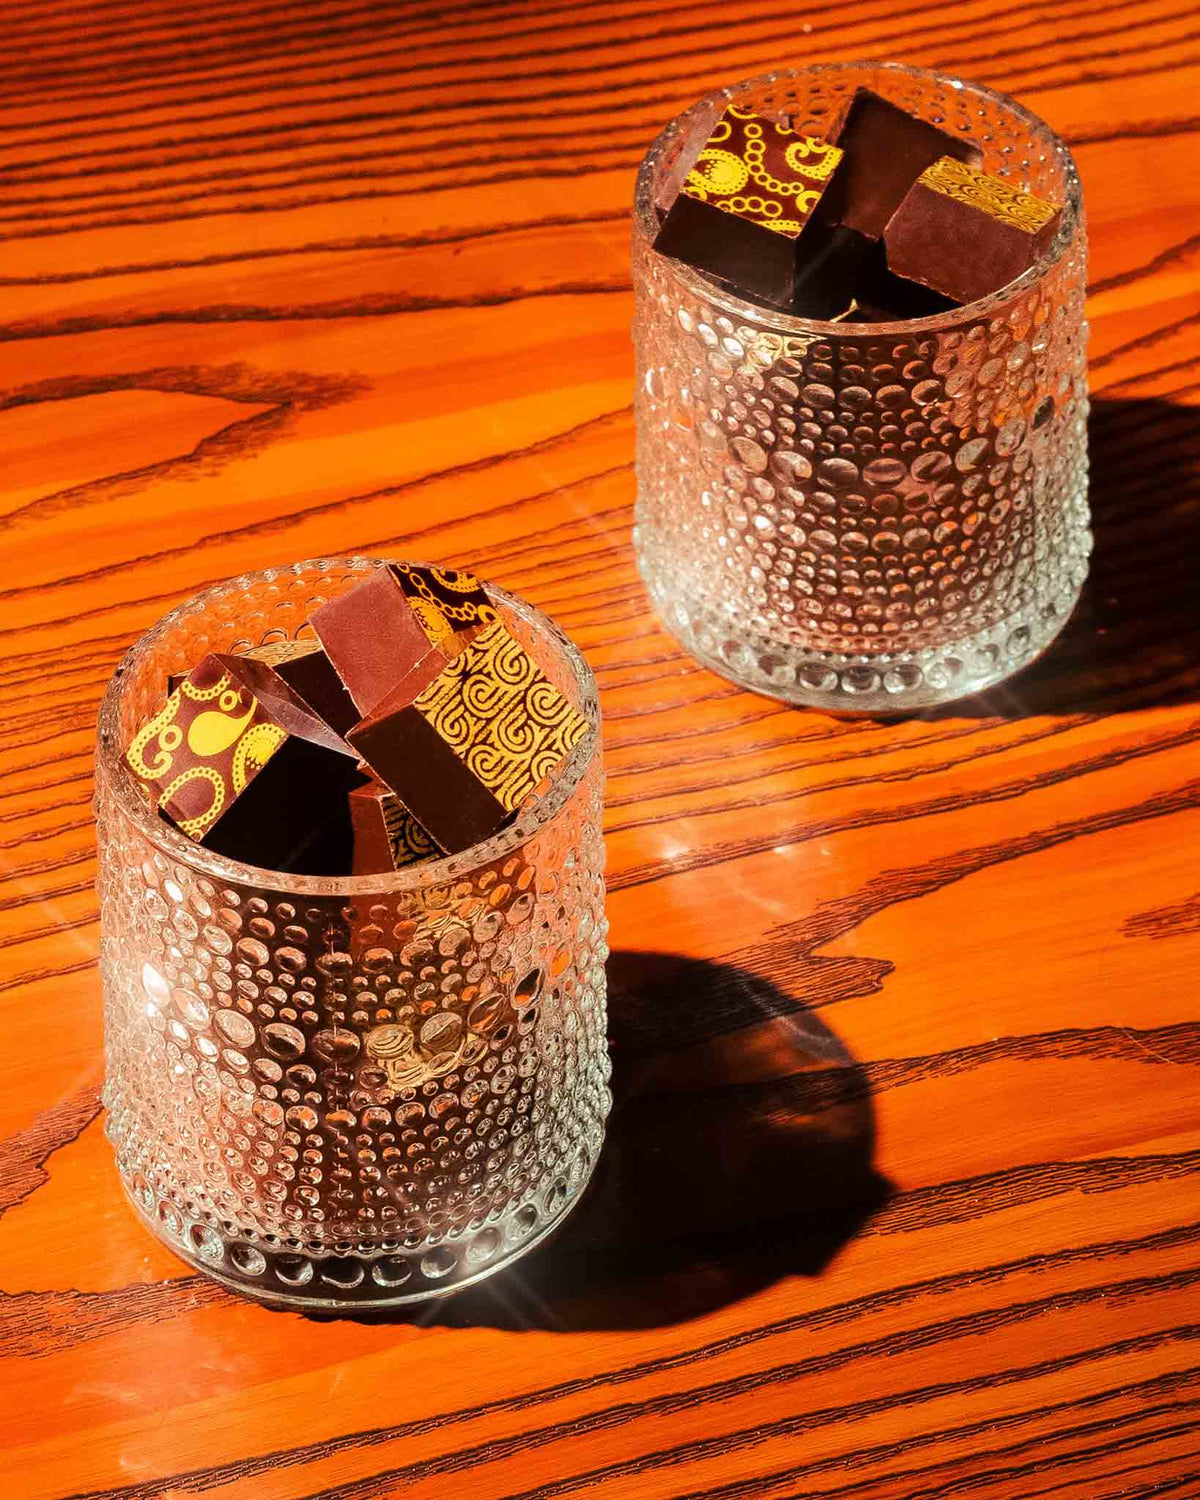 Luxury Dark Chocolate Whiskey Truffles - Gourmet Chocolate Gifts Compartes Los Angeles